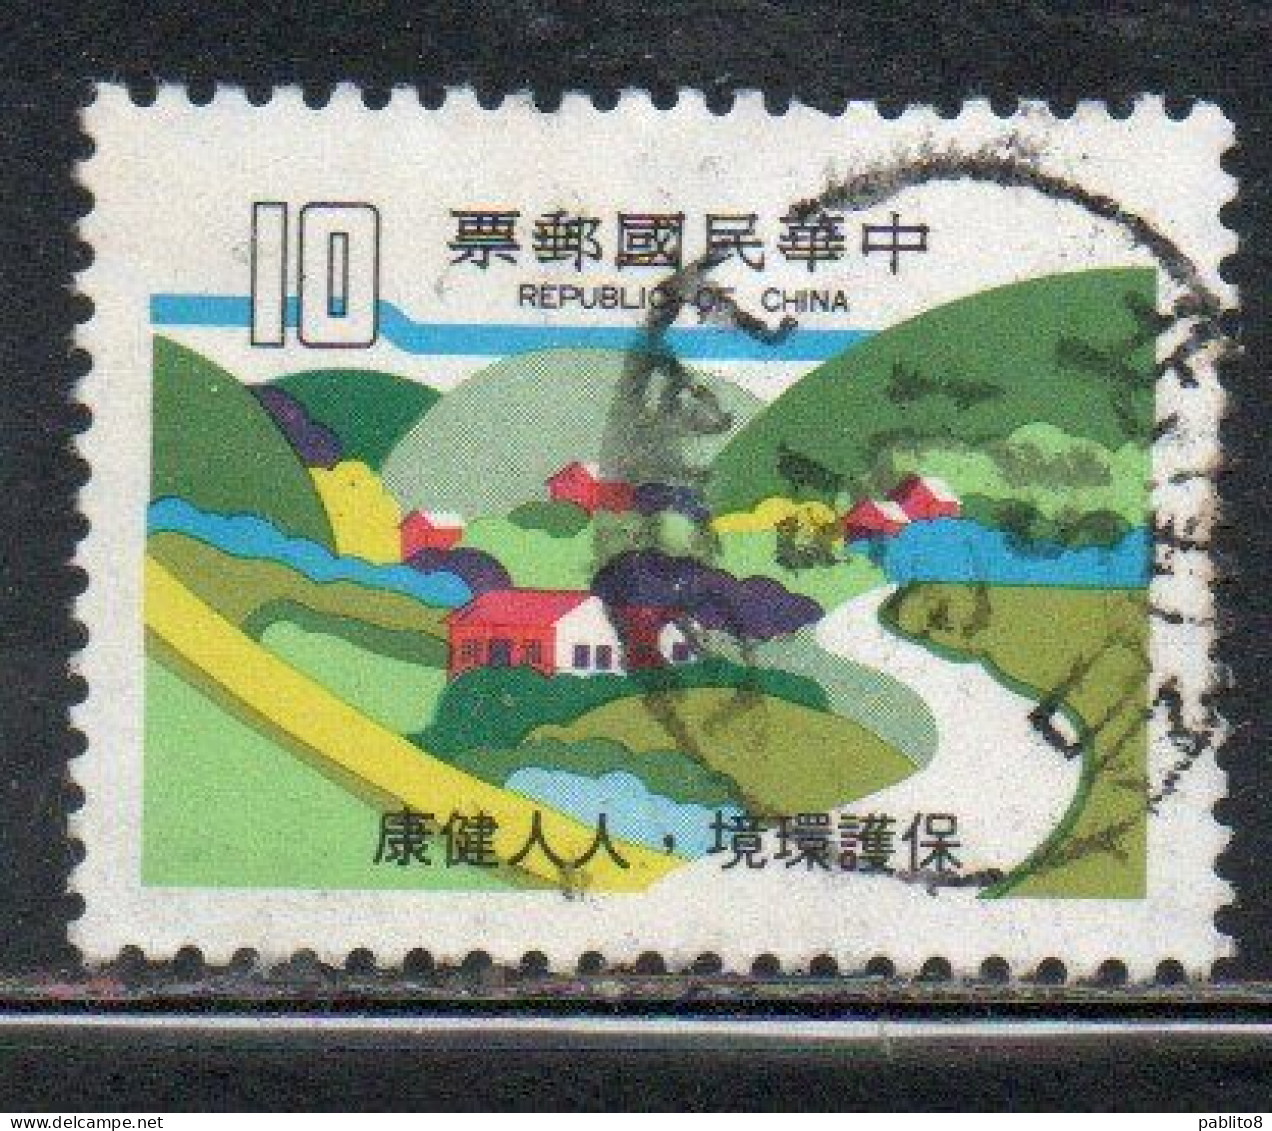 CHINA REPUBLIC CINA TAIWAN FORMOSA 1979 PROTECTION OF THE ENVIRONMENT RURAL LANDSCAPE 10$ USED USATO OBLITERE' - Gebruikt